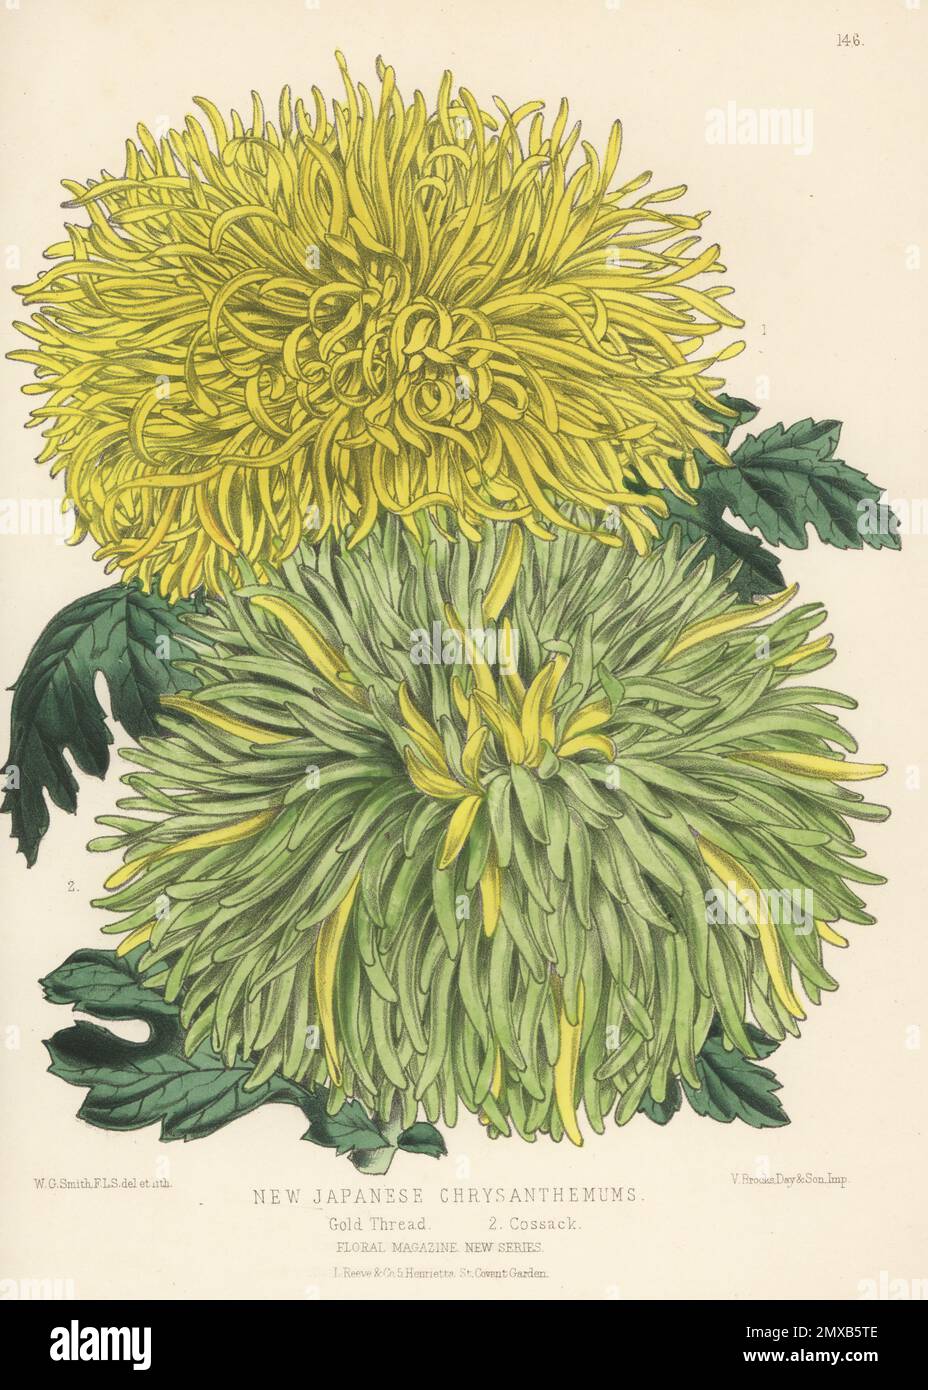 New Japanese chrysanthemum cultivars: Gold Thread and Cossack. Raised by Messrs Veitch and Sons, Chelsea. Handcolored botanical illustration drawn and lithographed by Worthington George Smith from Henry Honywood Dombrain's Floral Magazine, New Series, Volume 4, L. Reeve, London, 1875. Lithograph printed by Vincent Brooks, Day & Son. Stock Photo